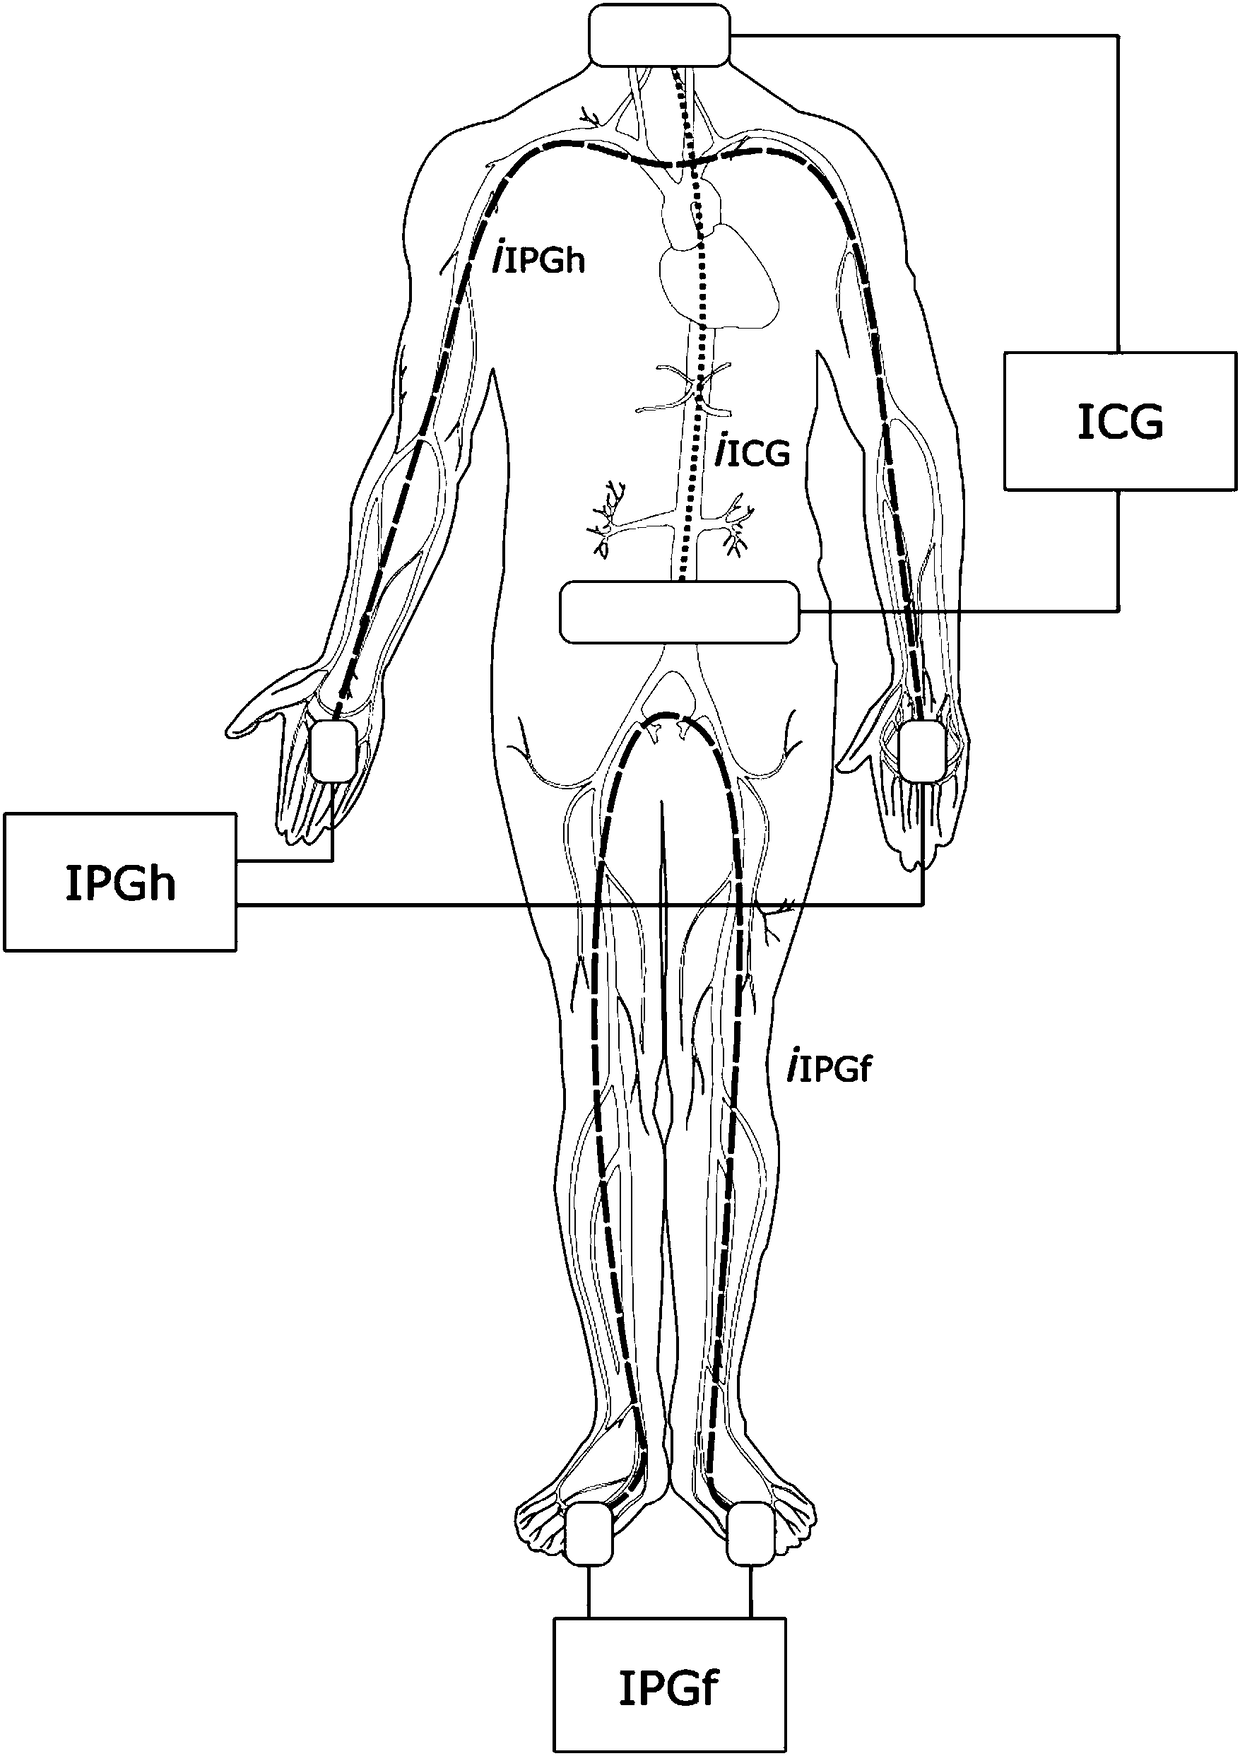 Method and device for estimating the transit time of the arterial pulse from measurements obtained in distal zones of the extremities